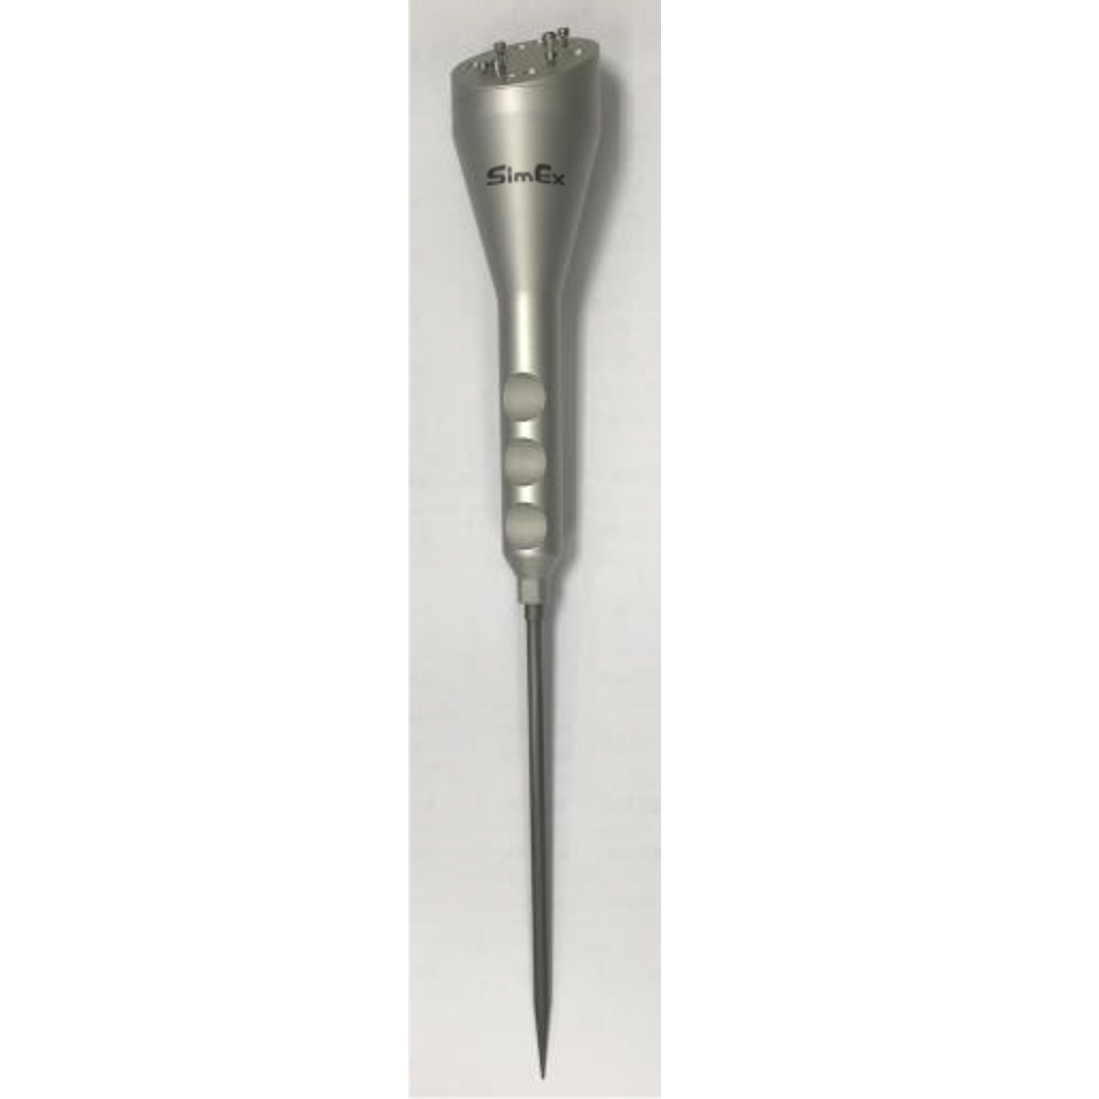 SimEx Part - Surgical Probe